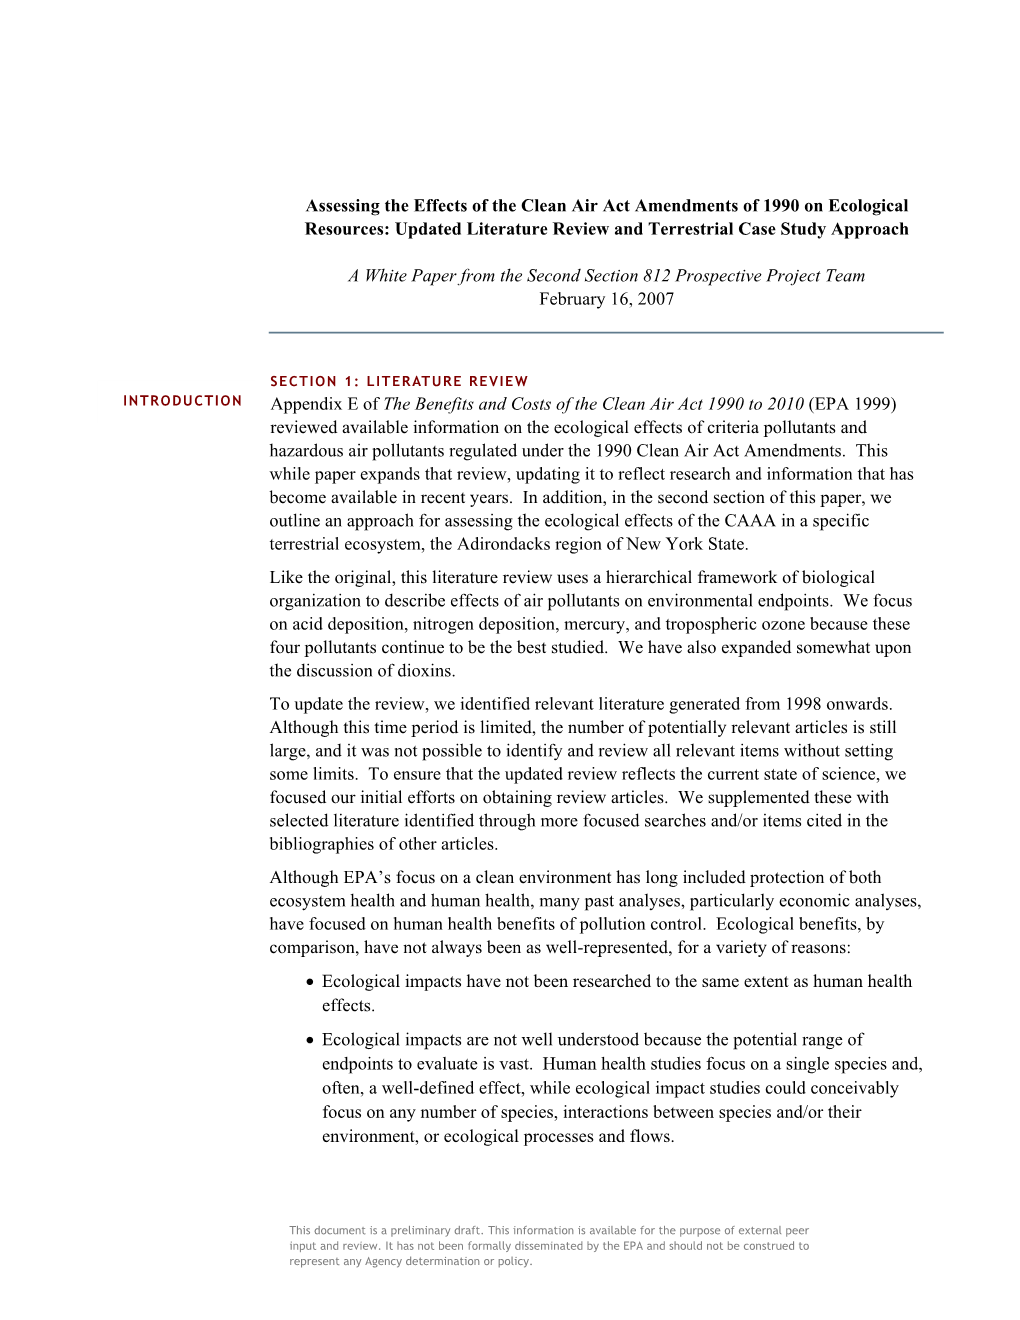 Assessing the Effects of the Clean Air Act Amendments of 1990 on Ecological Resources: Updated Literature Review and Terrestrial Case Study Approach